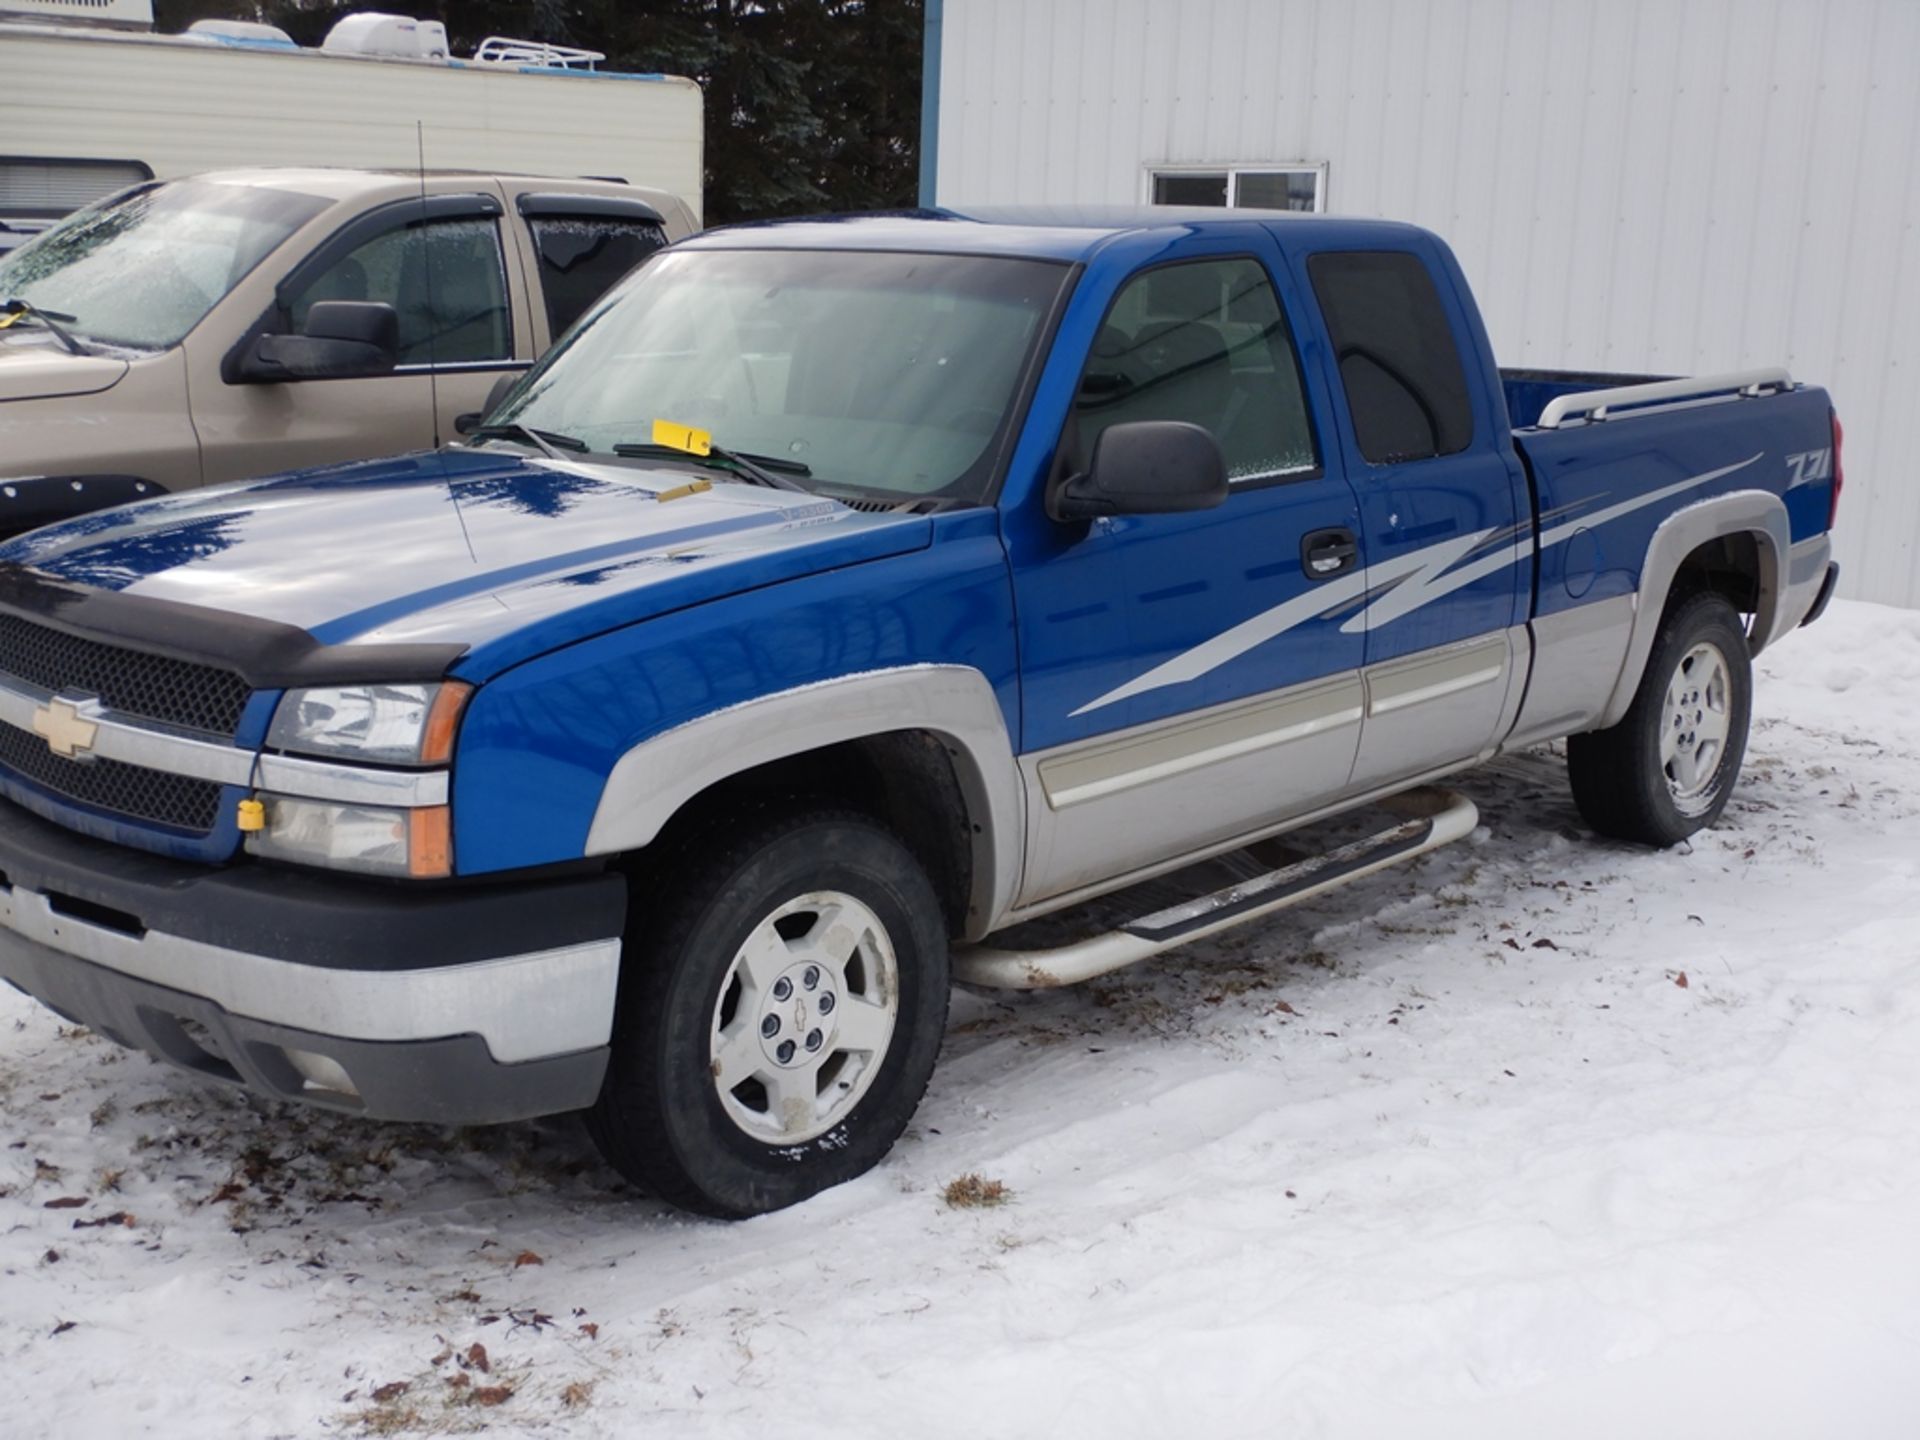 2004 CHEV Z71 OFF ROAD 4X4 EXT CAB PICKUP, GAS ENGINE, AT/SHORT BOX, 114,408 KM SHOWING S/N